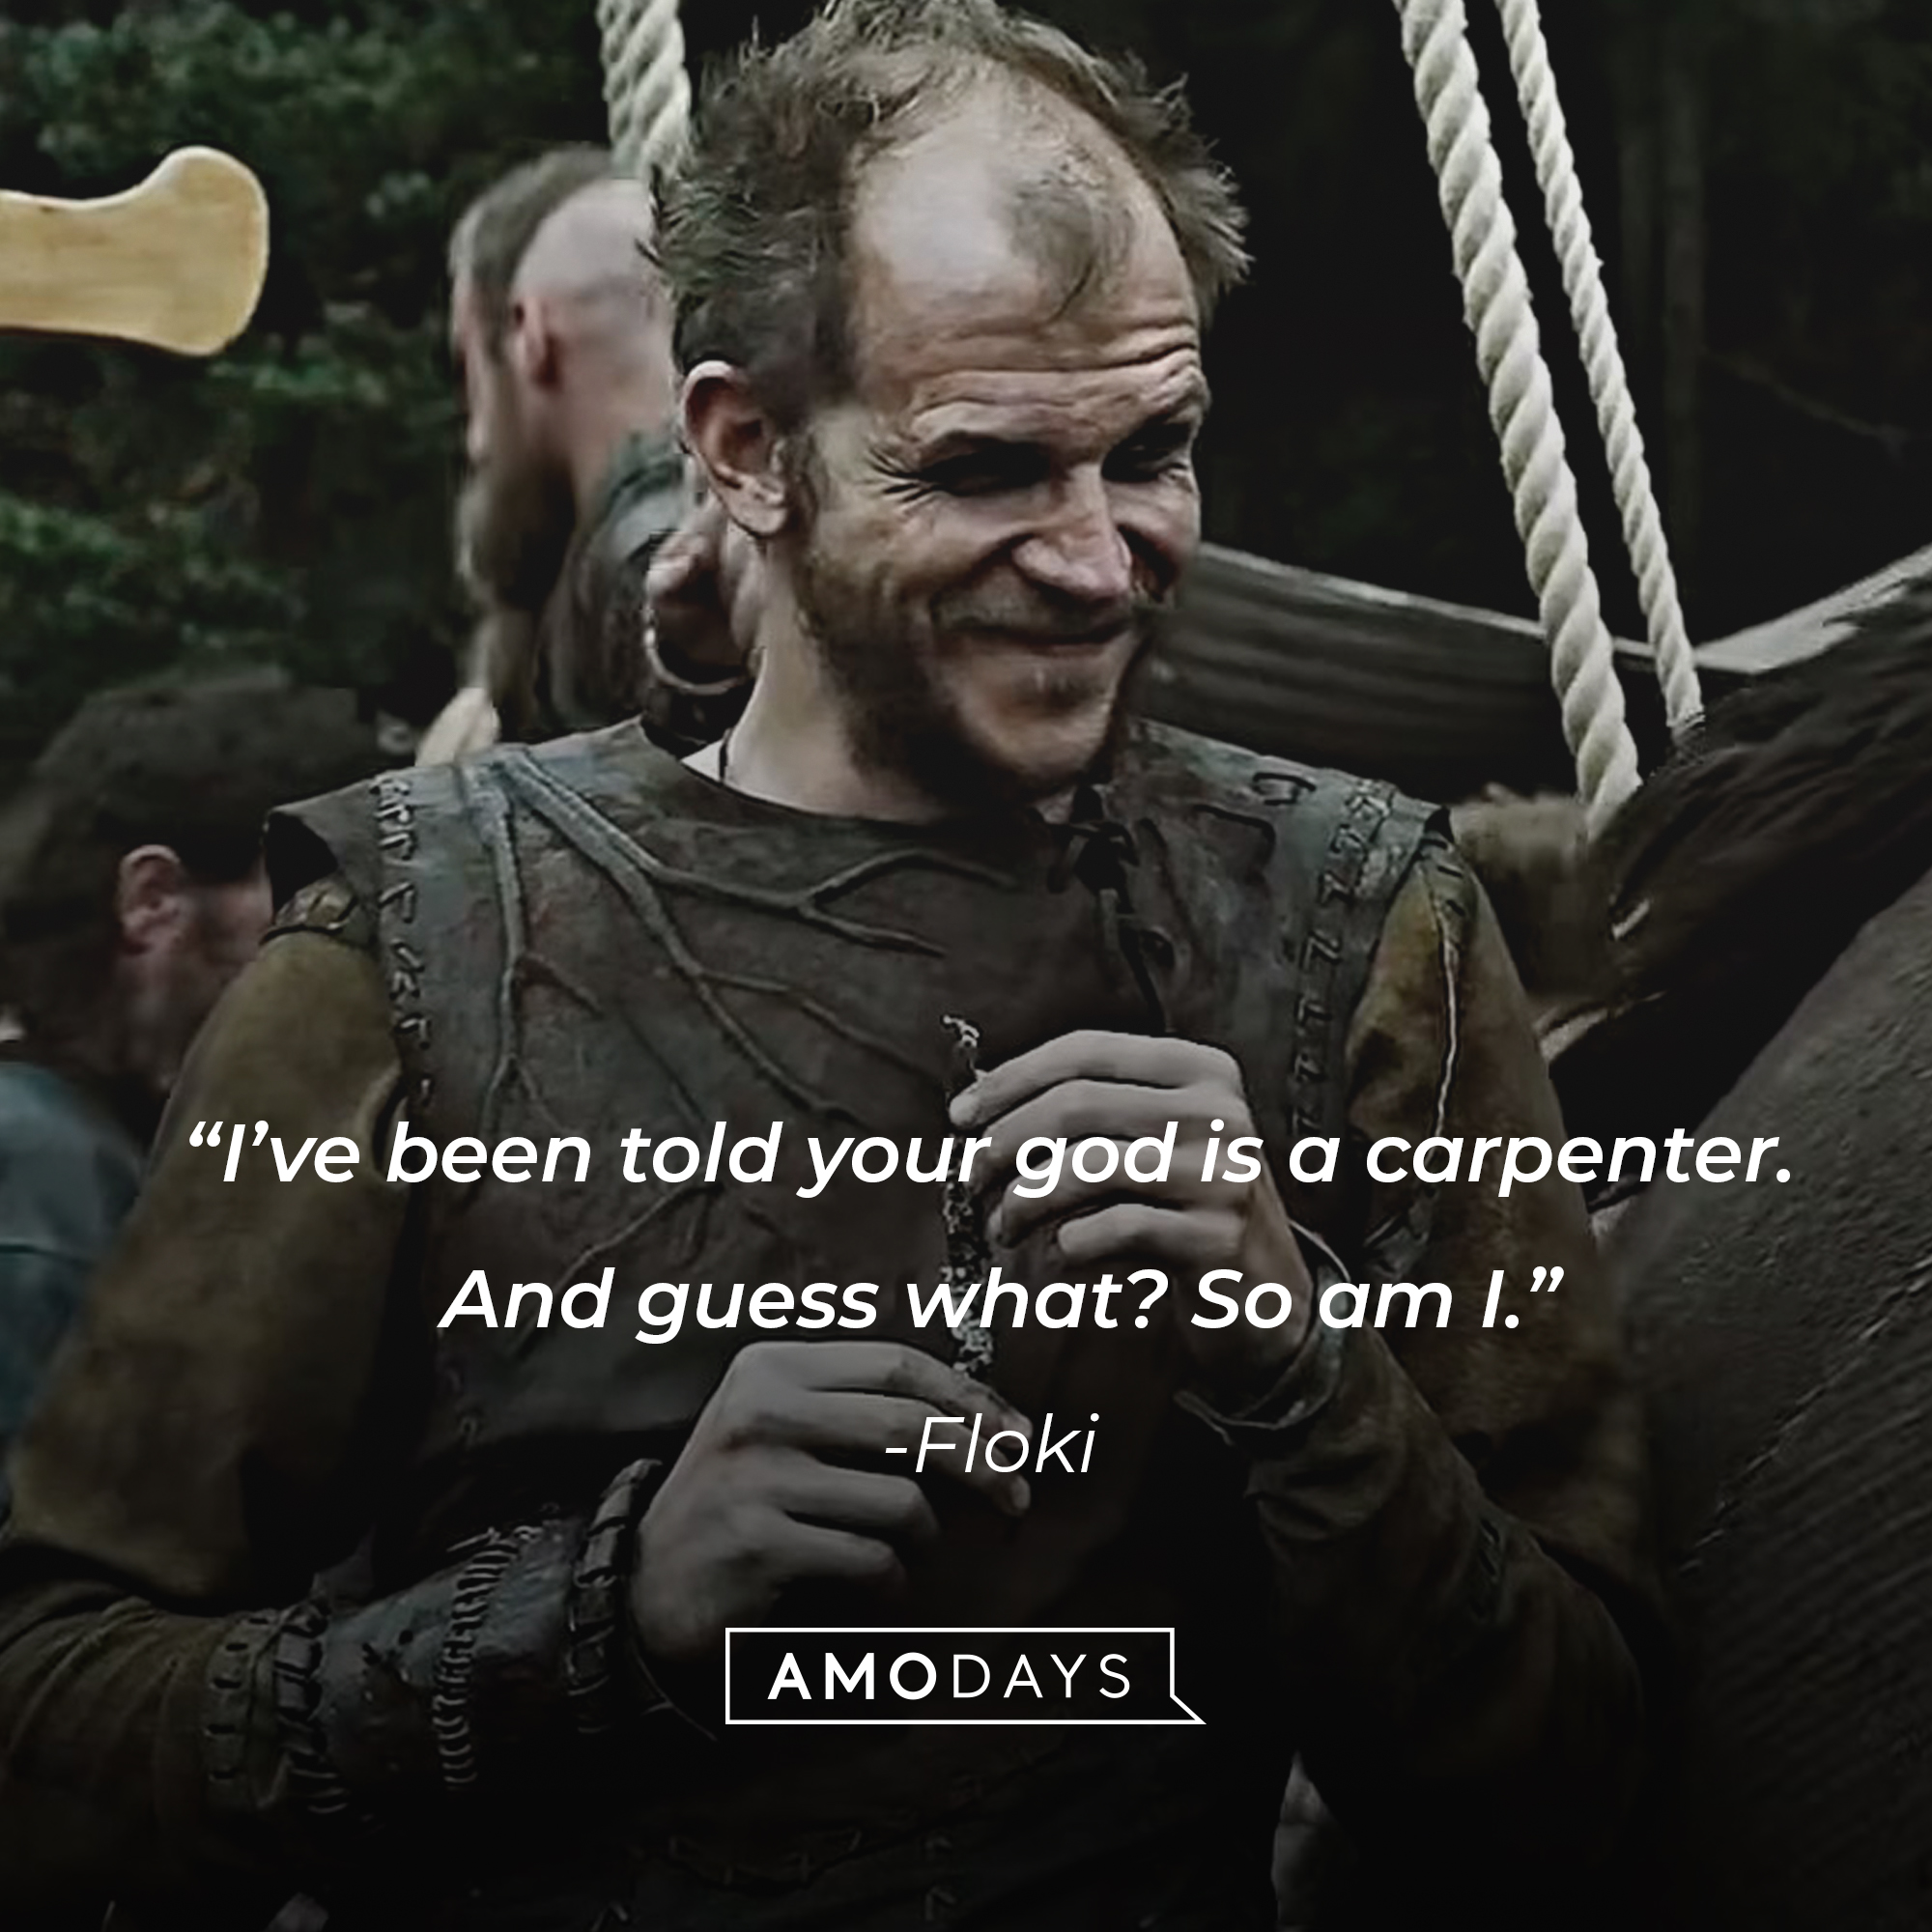 An image of Floki with his quote: “I’ve been told your god is a carpenter. And guess what? So am I.” | Source: facebook.com/Vikings